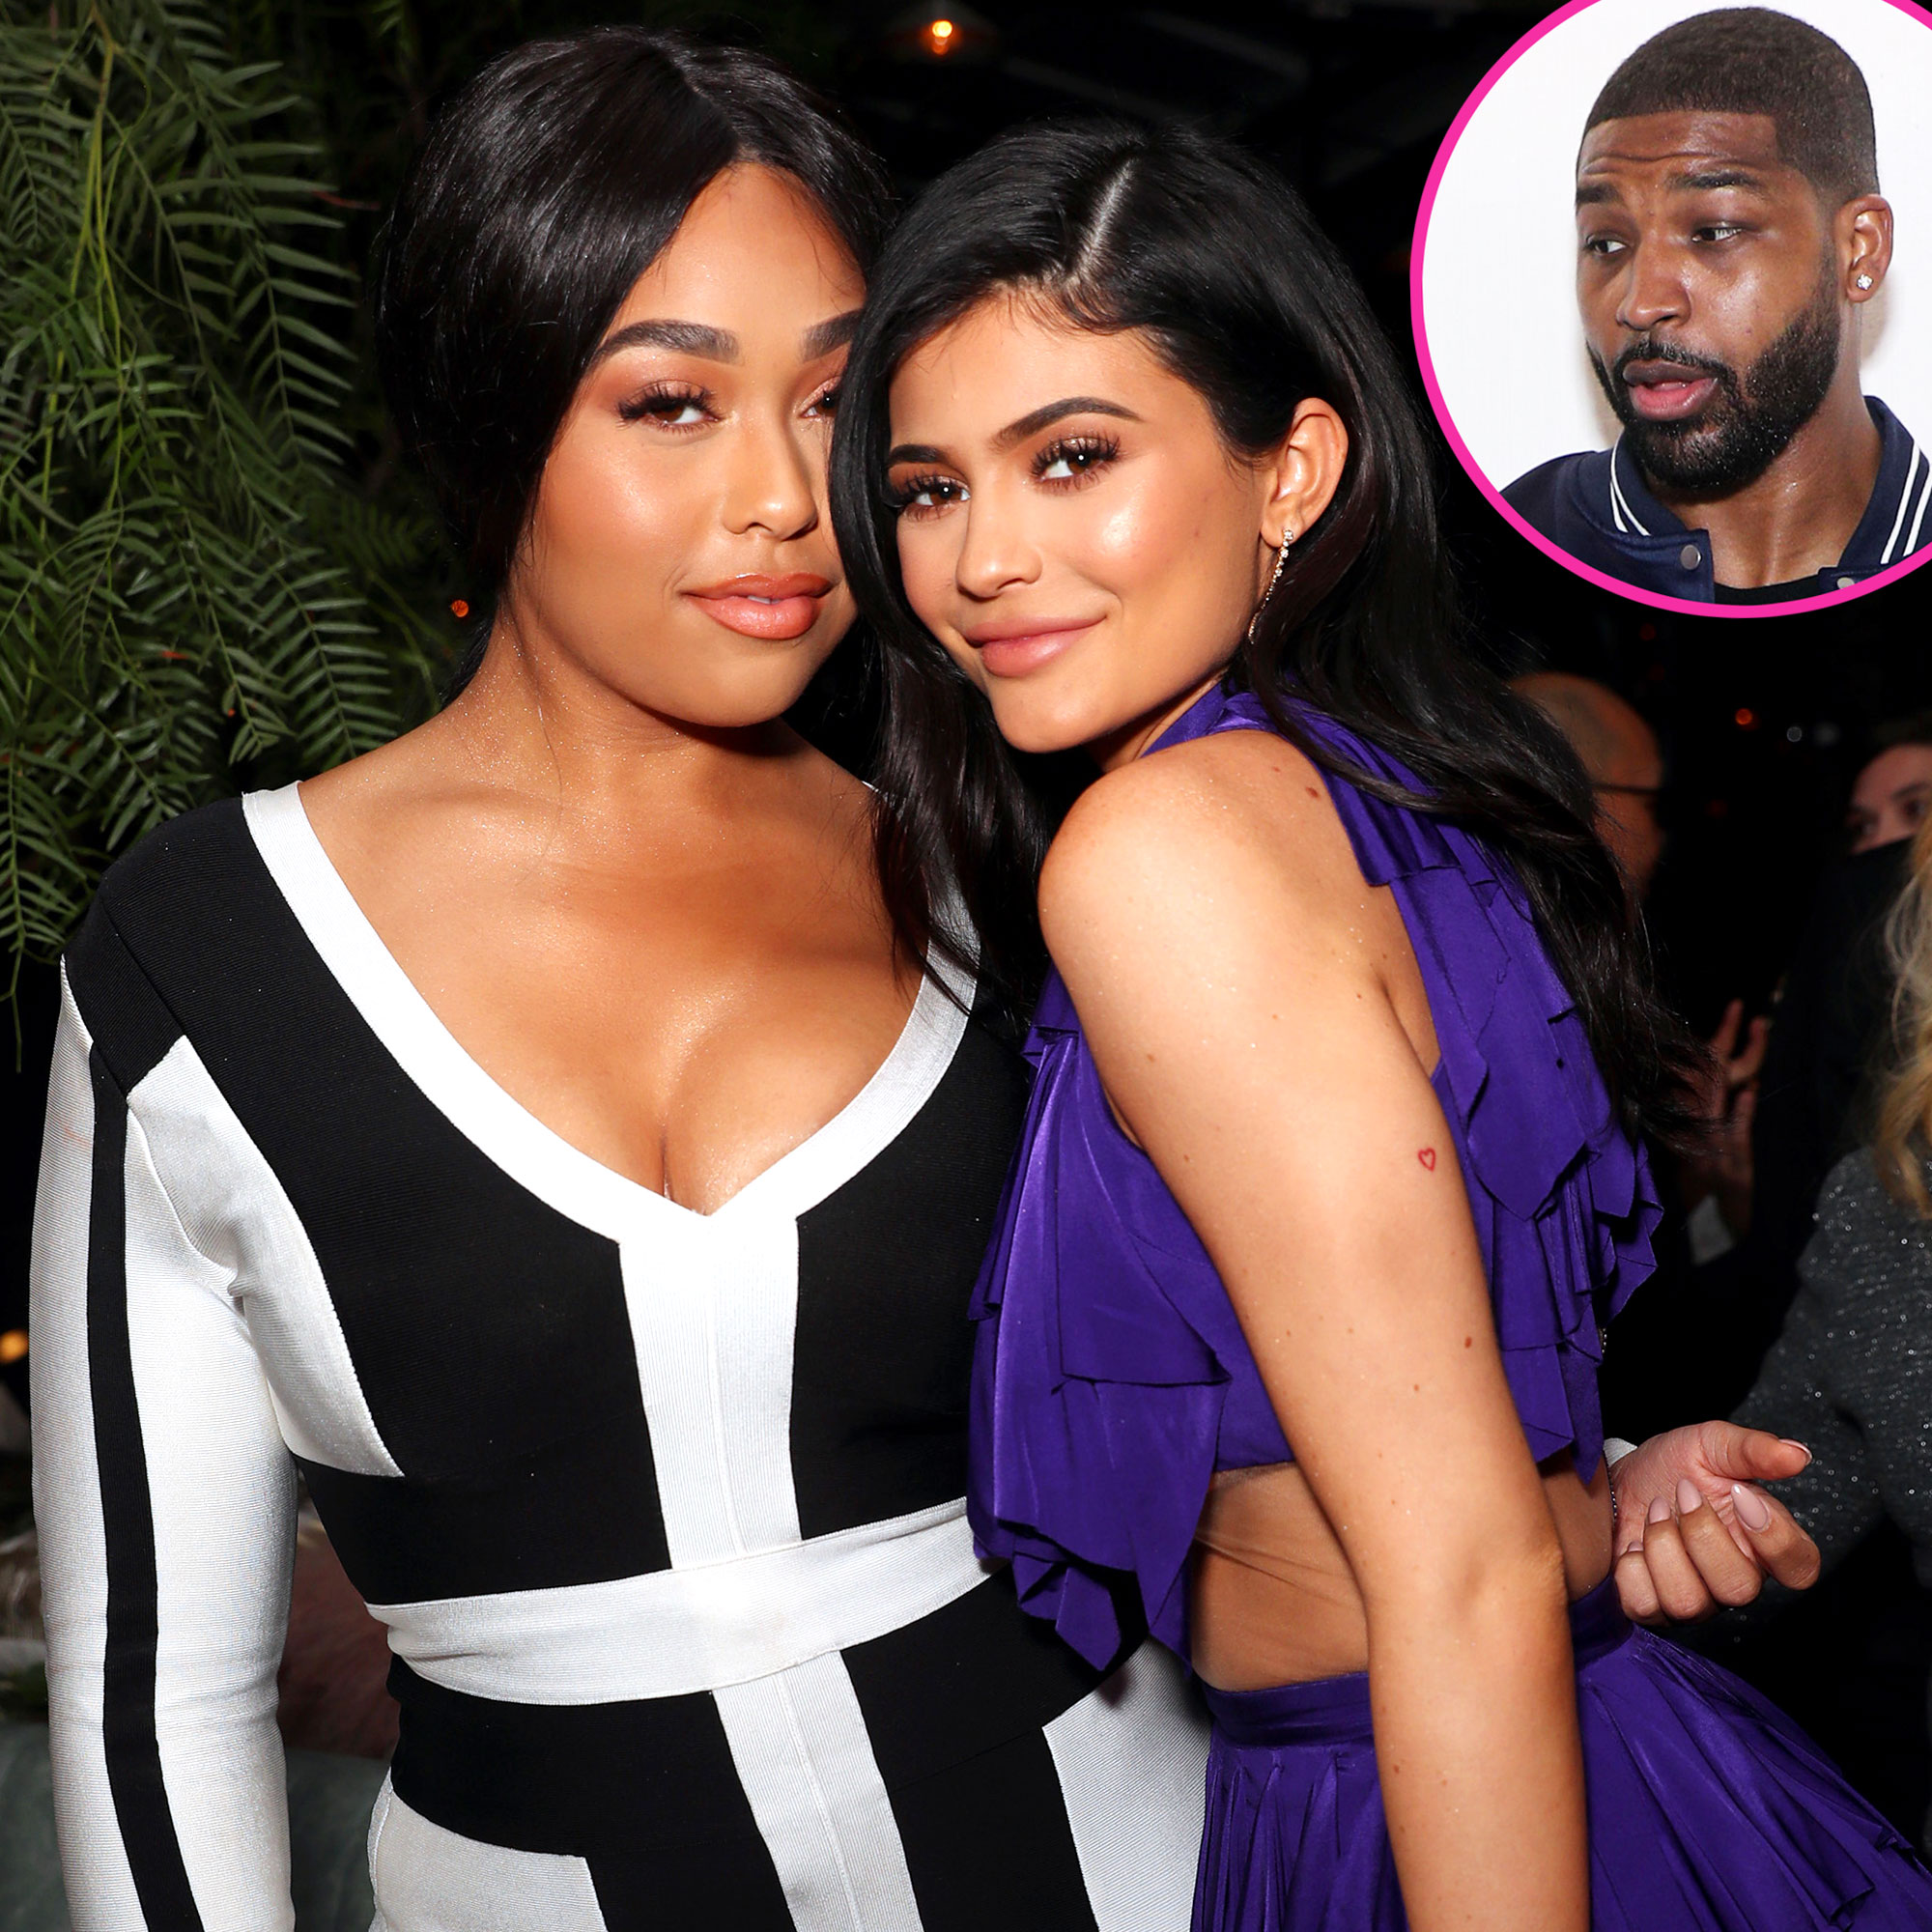 My Sisters Hot Friend Sex - Kylie Jenner: Everything That Happened Since Jordyn Woods Scandal